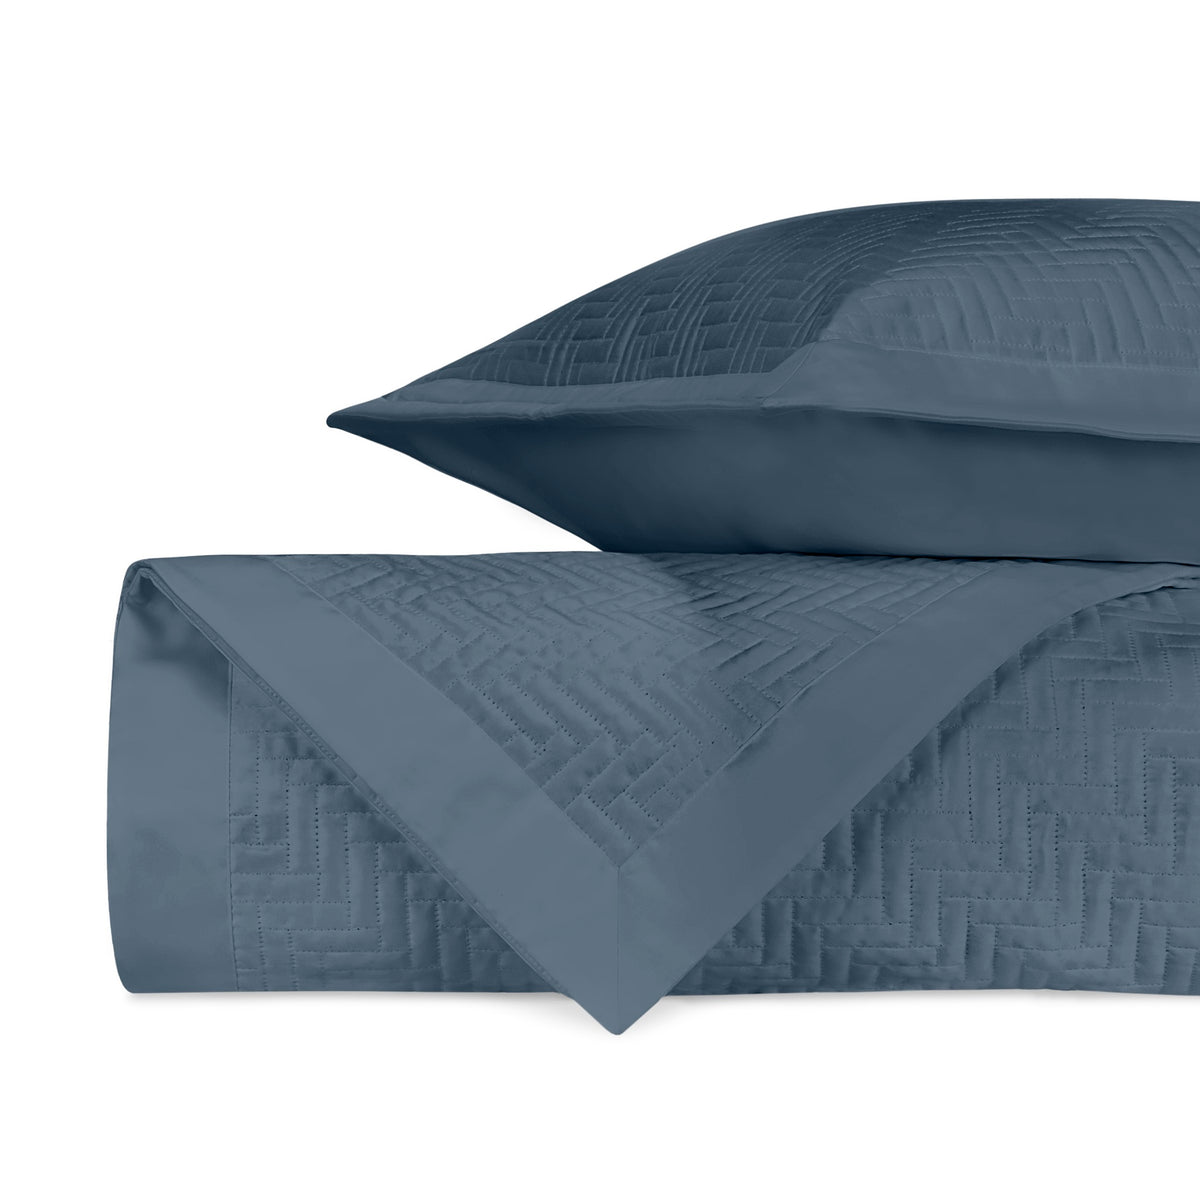 Stack Image of Home Treasures Baxter Royal Sateen Quilted Bedding in Color Slate Blue